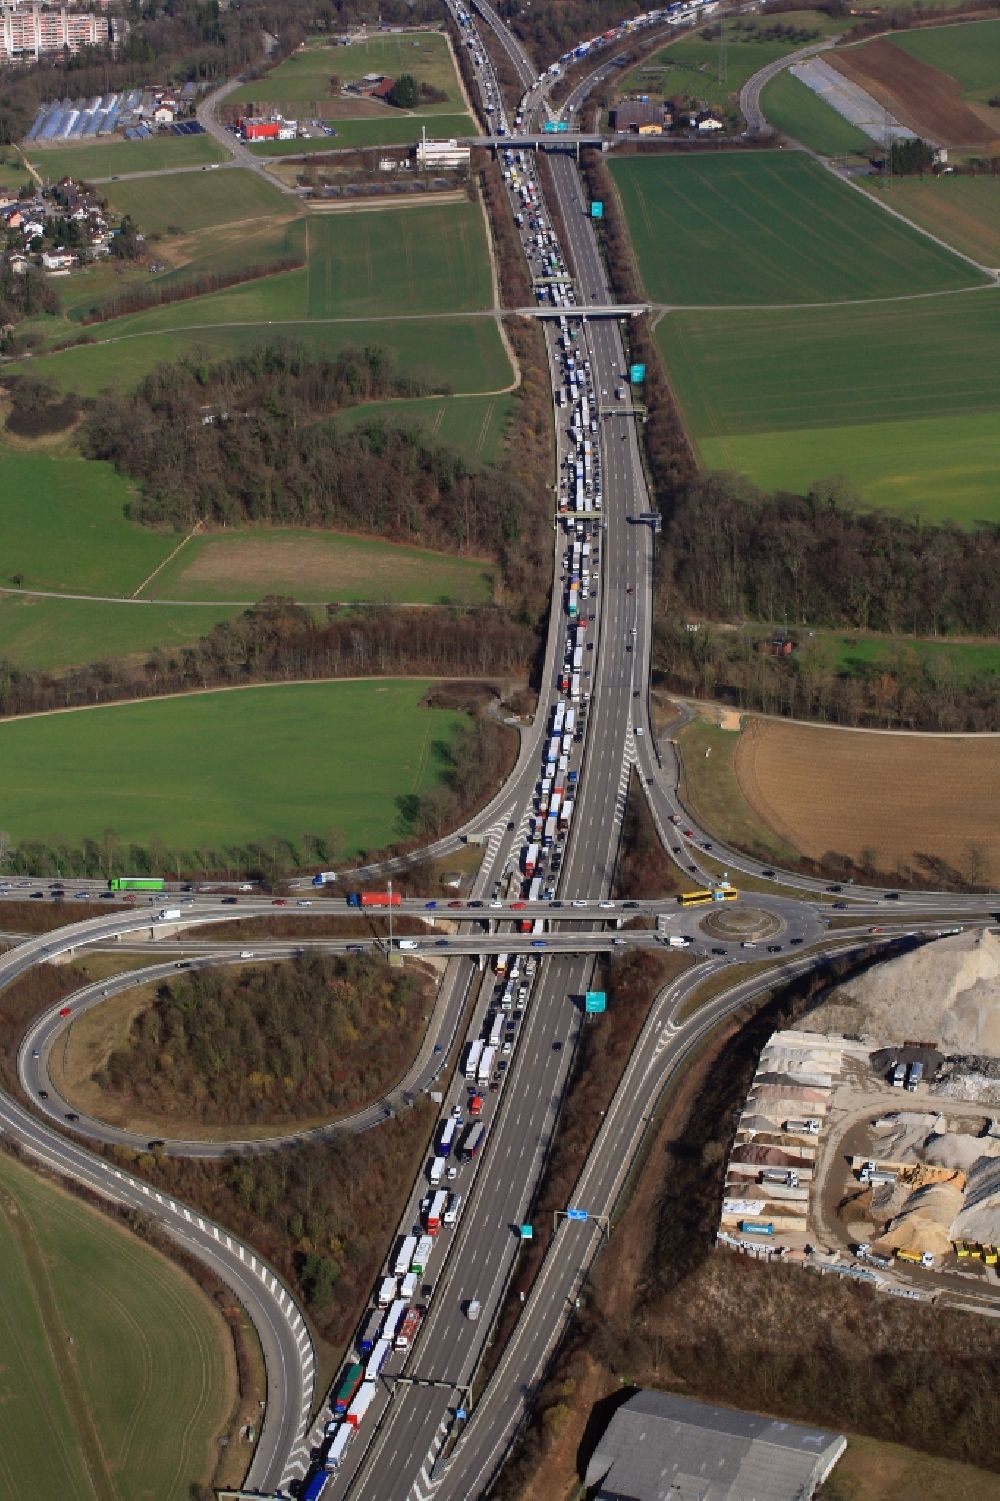 Pratteln from above - Highway congestion along the route of the lanes of motorway A3 in Pratteln in the canton Basel-Landschaft, Switzerland